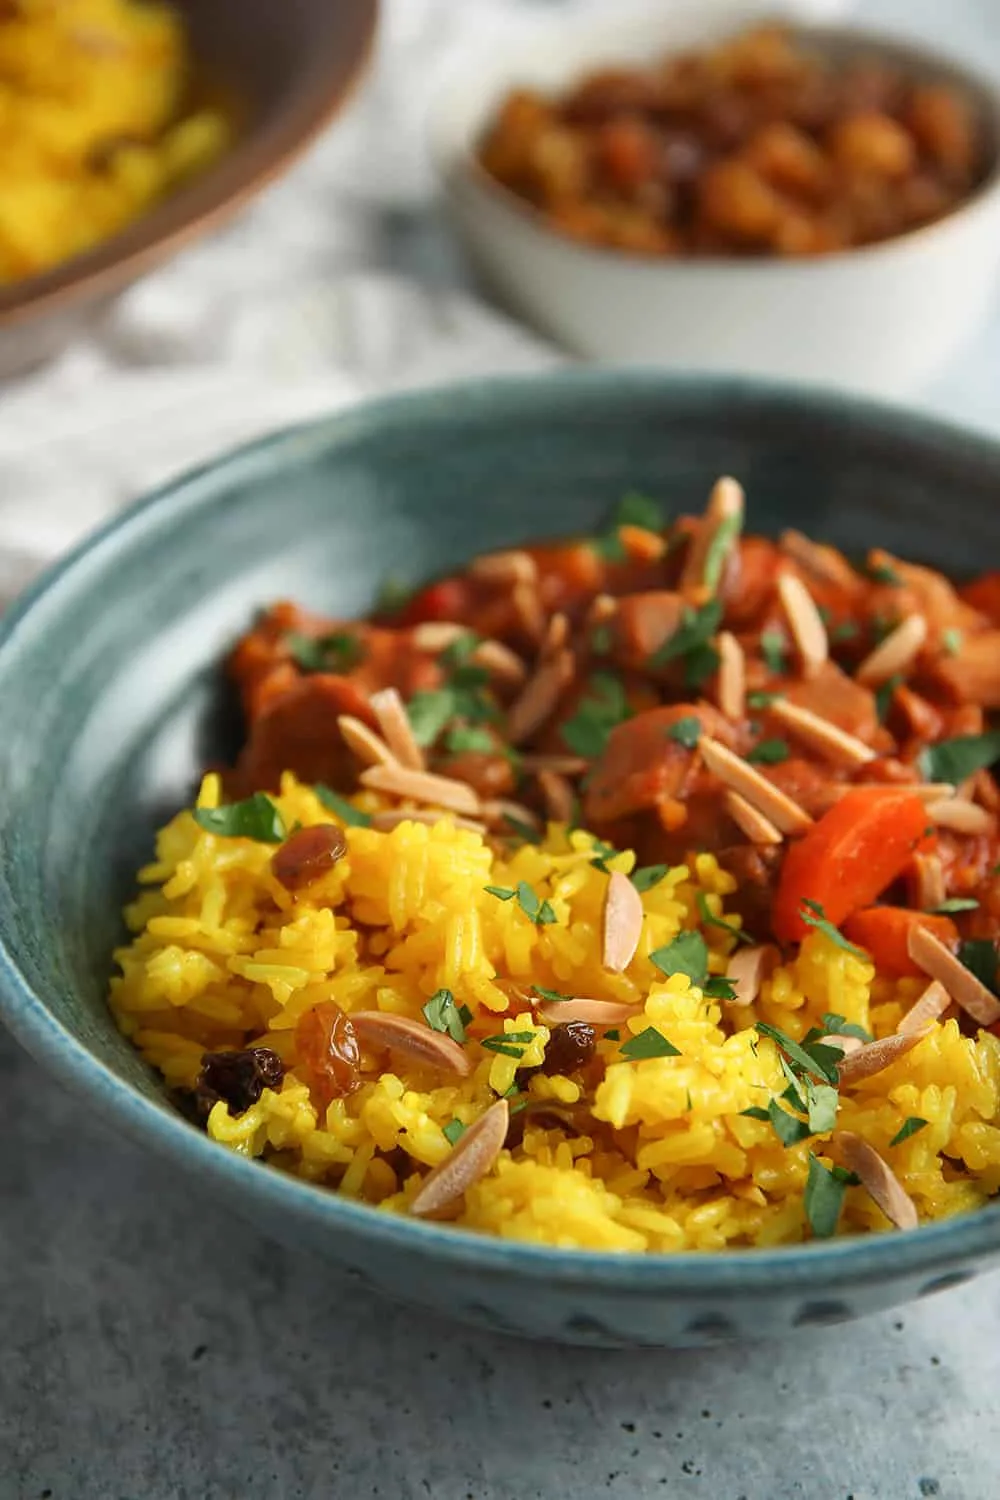 Complement the rich flavors of Quick Moroccan Chicken Stew with Ginger-Turmeric Rice